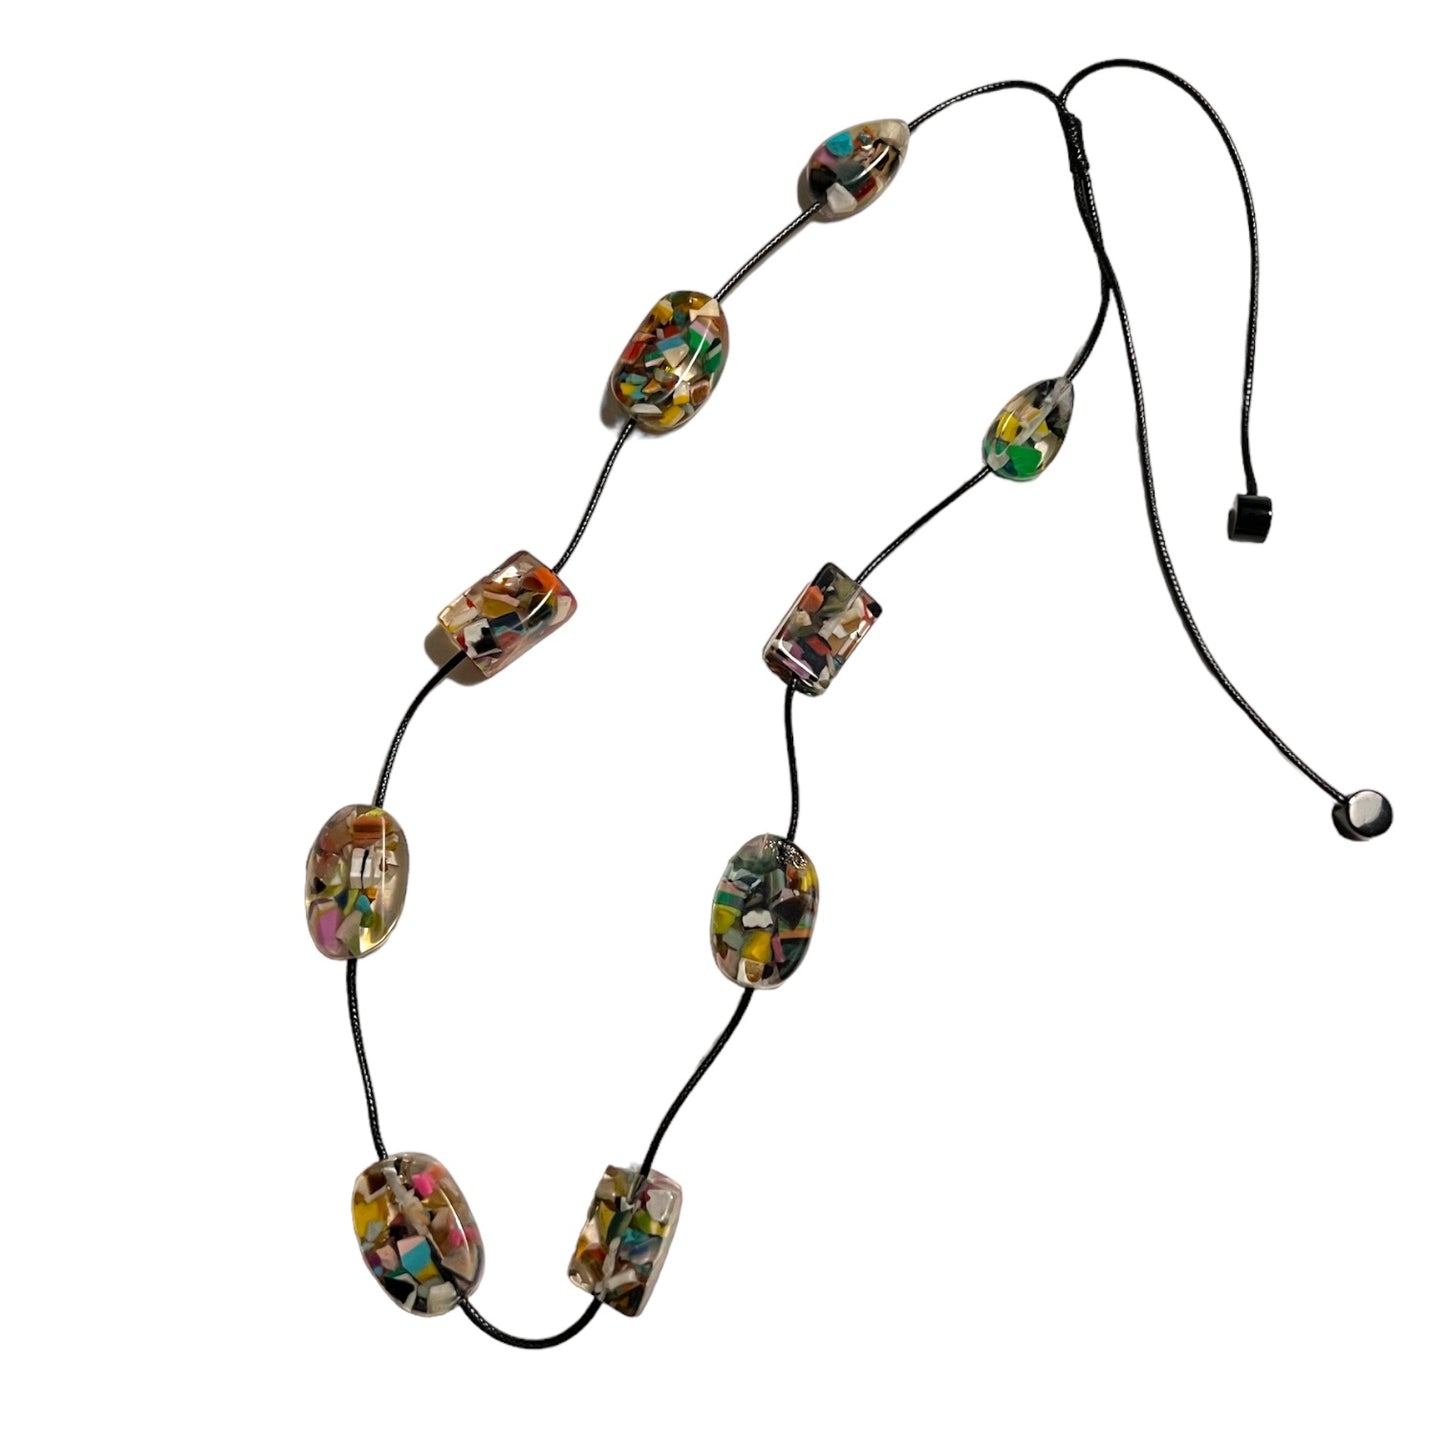 80171 Mystere Necklace